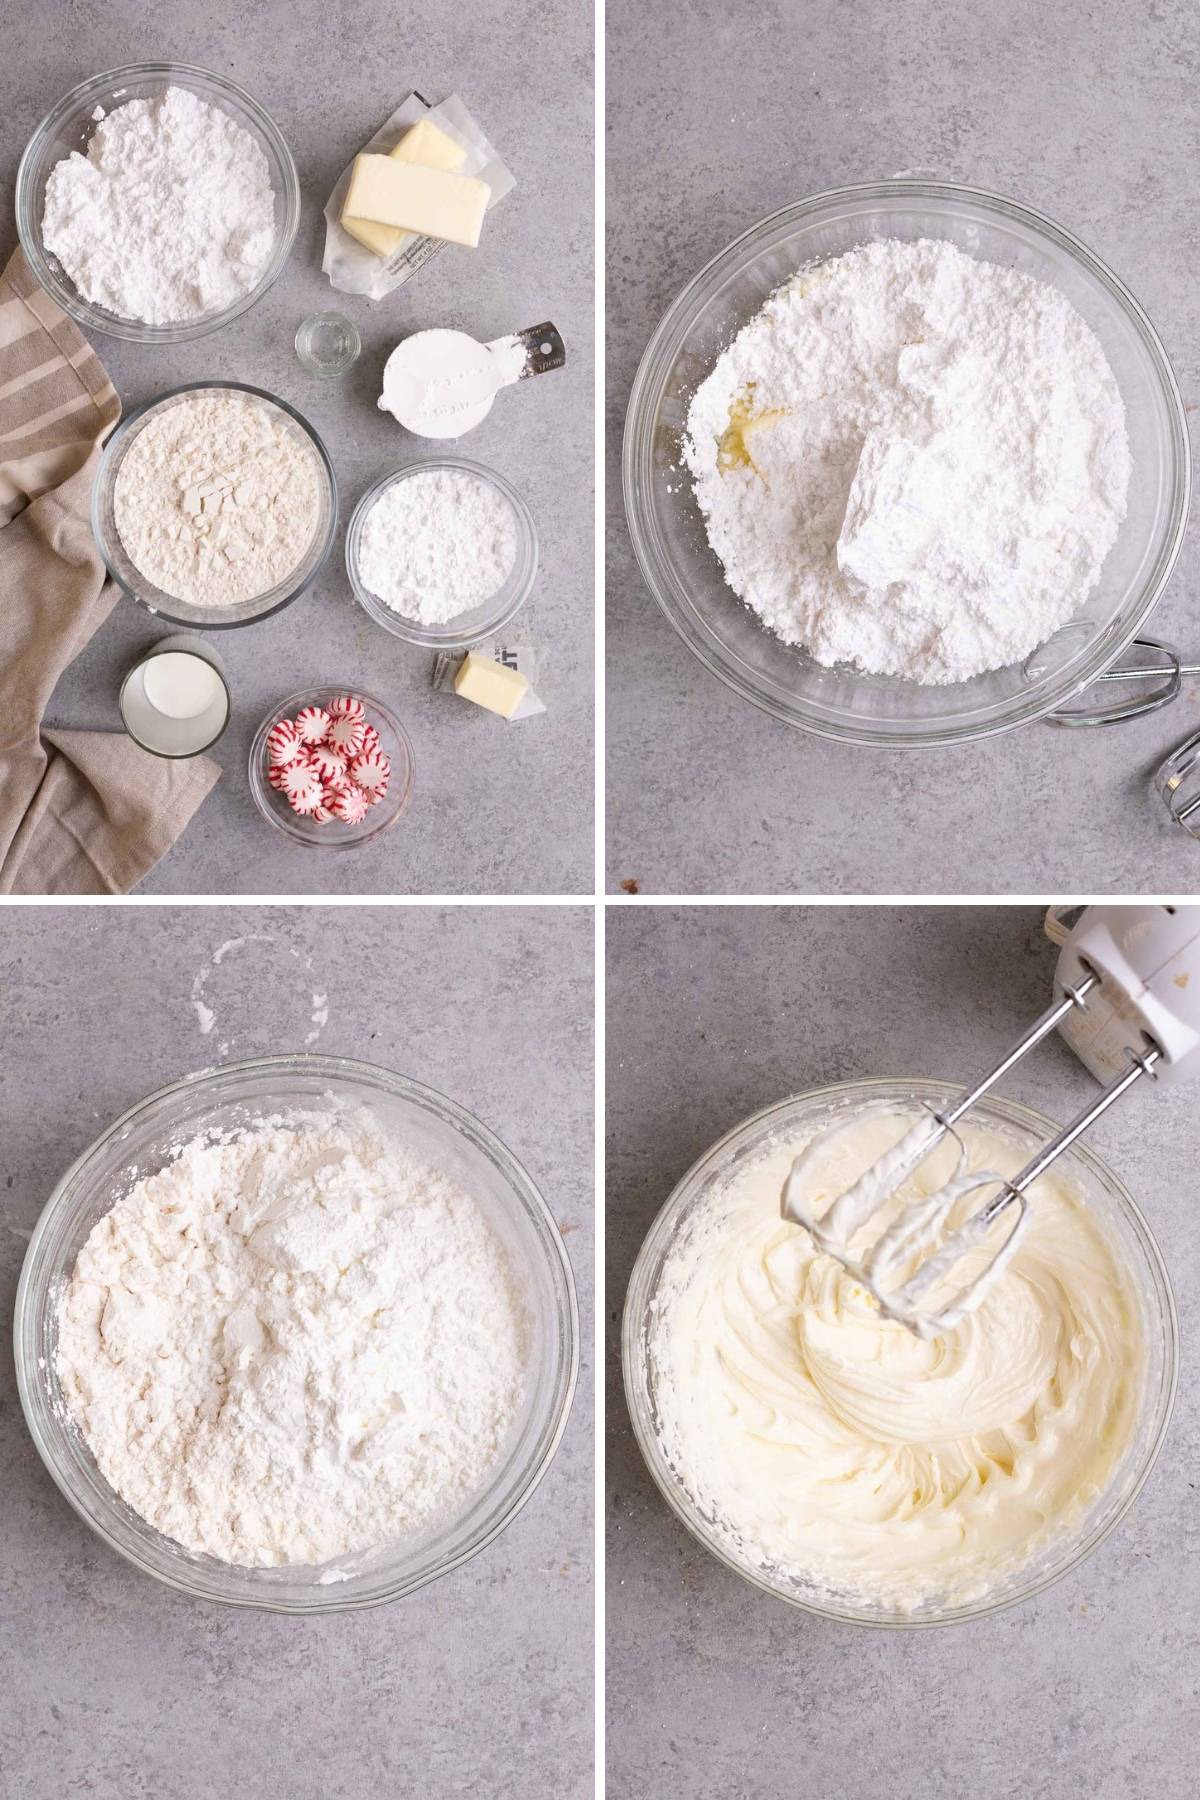 Collage of ingredients and steps to make Peppermint Meltaways.